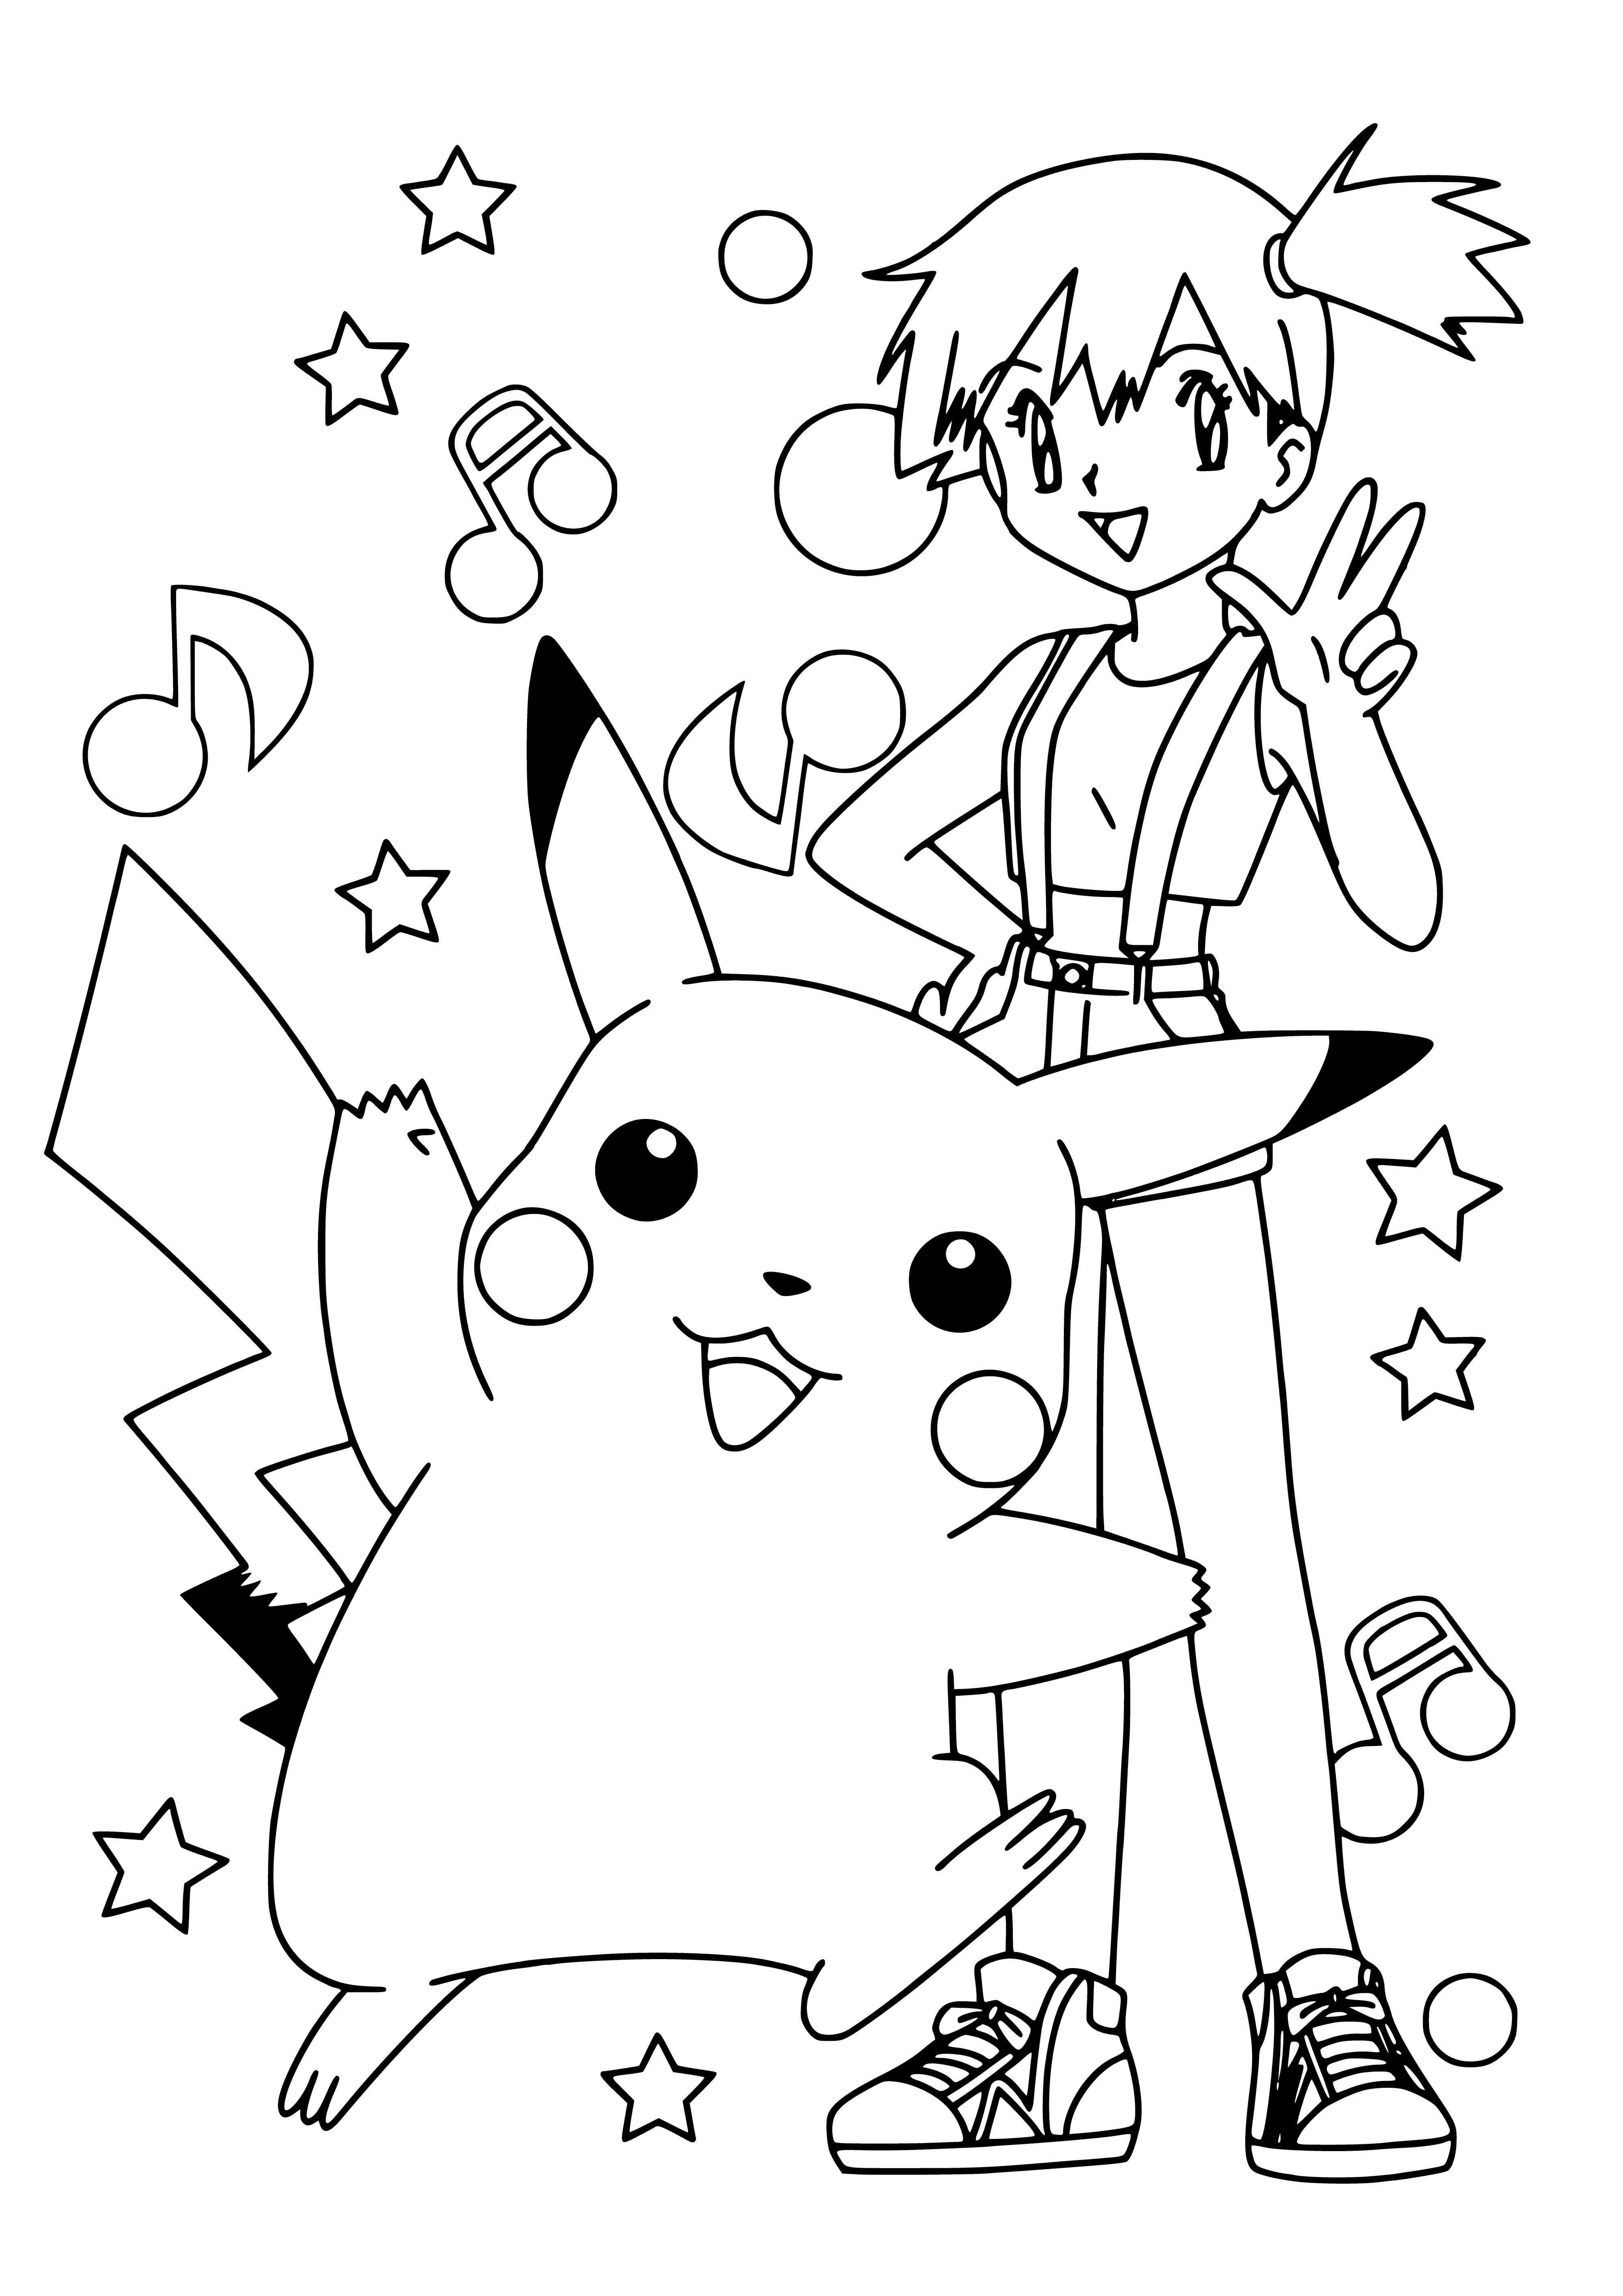 coloring page: Pikachu & Misty stand on a cliff by the ocean, Pikachu with a fishing rod & Misty with a net. Smiles on their faces!